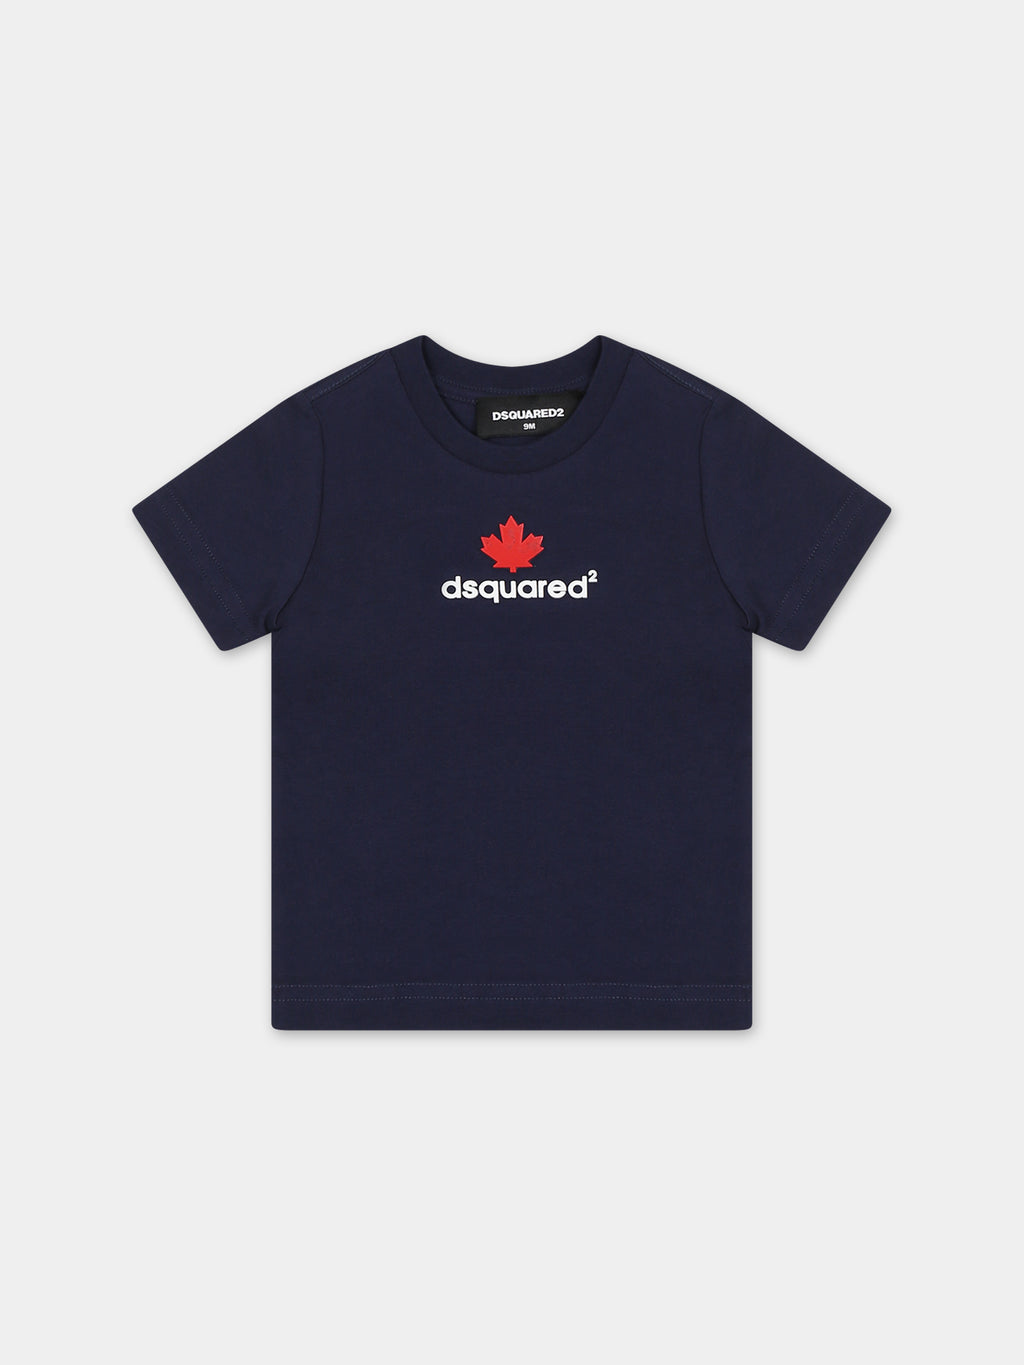 Blue t-shirt for baby kids with logo